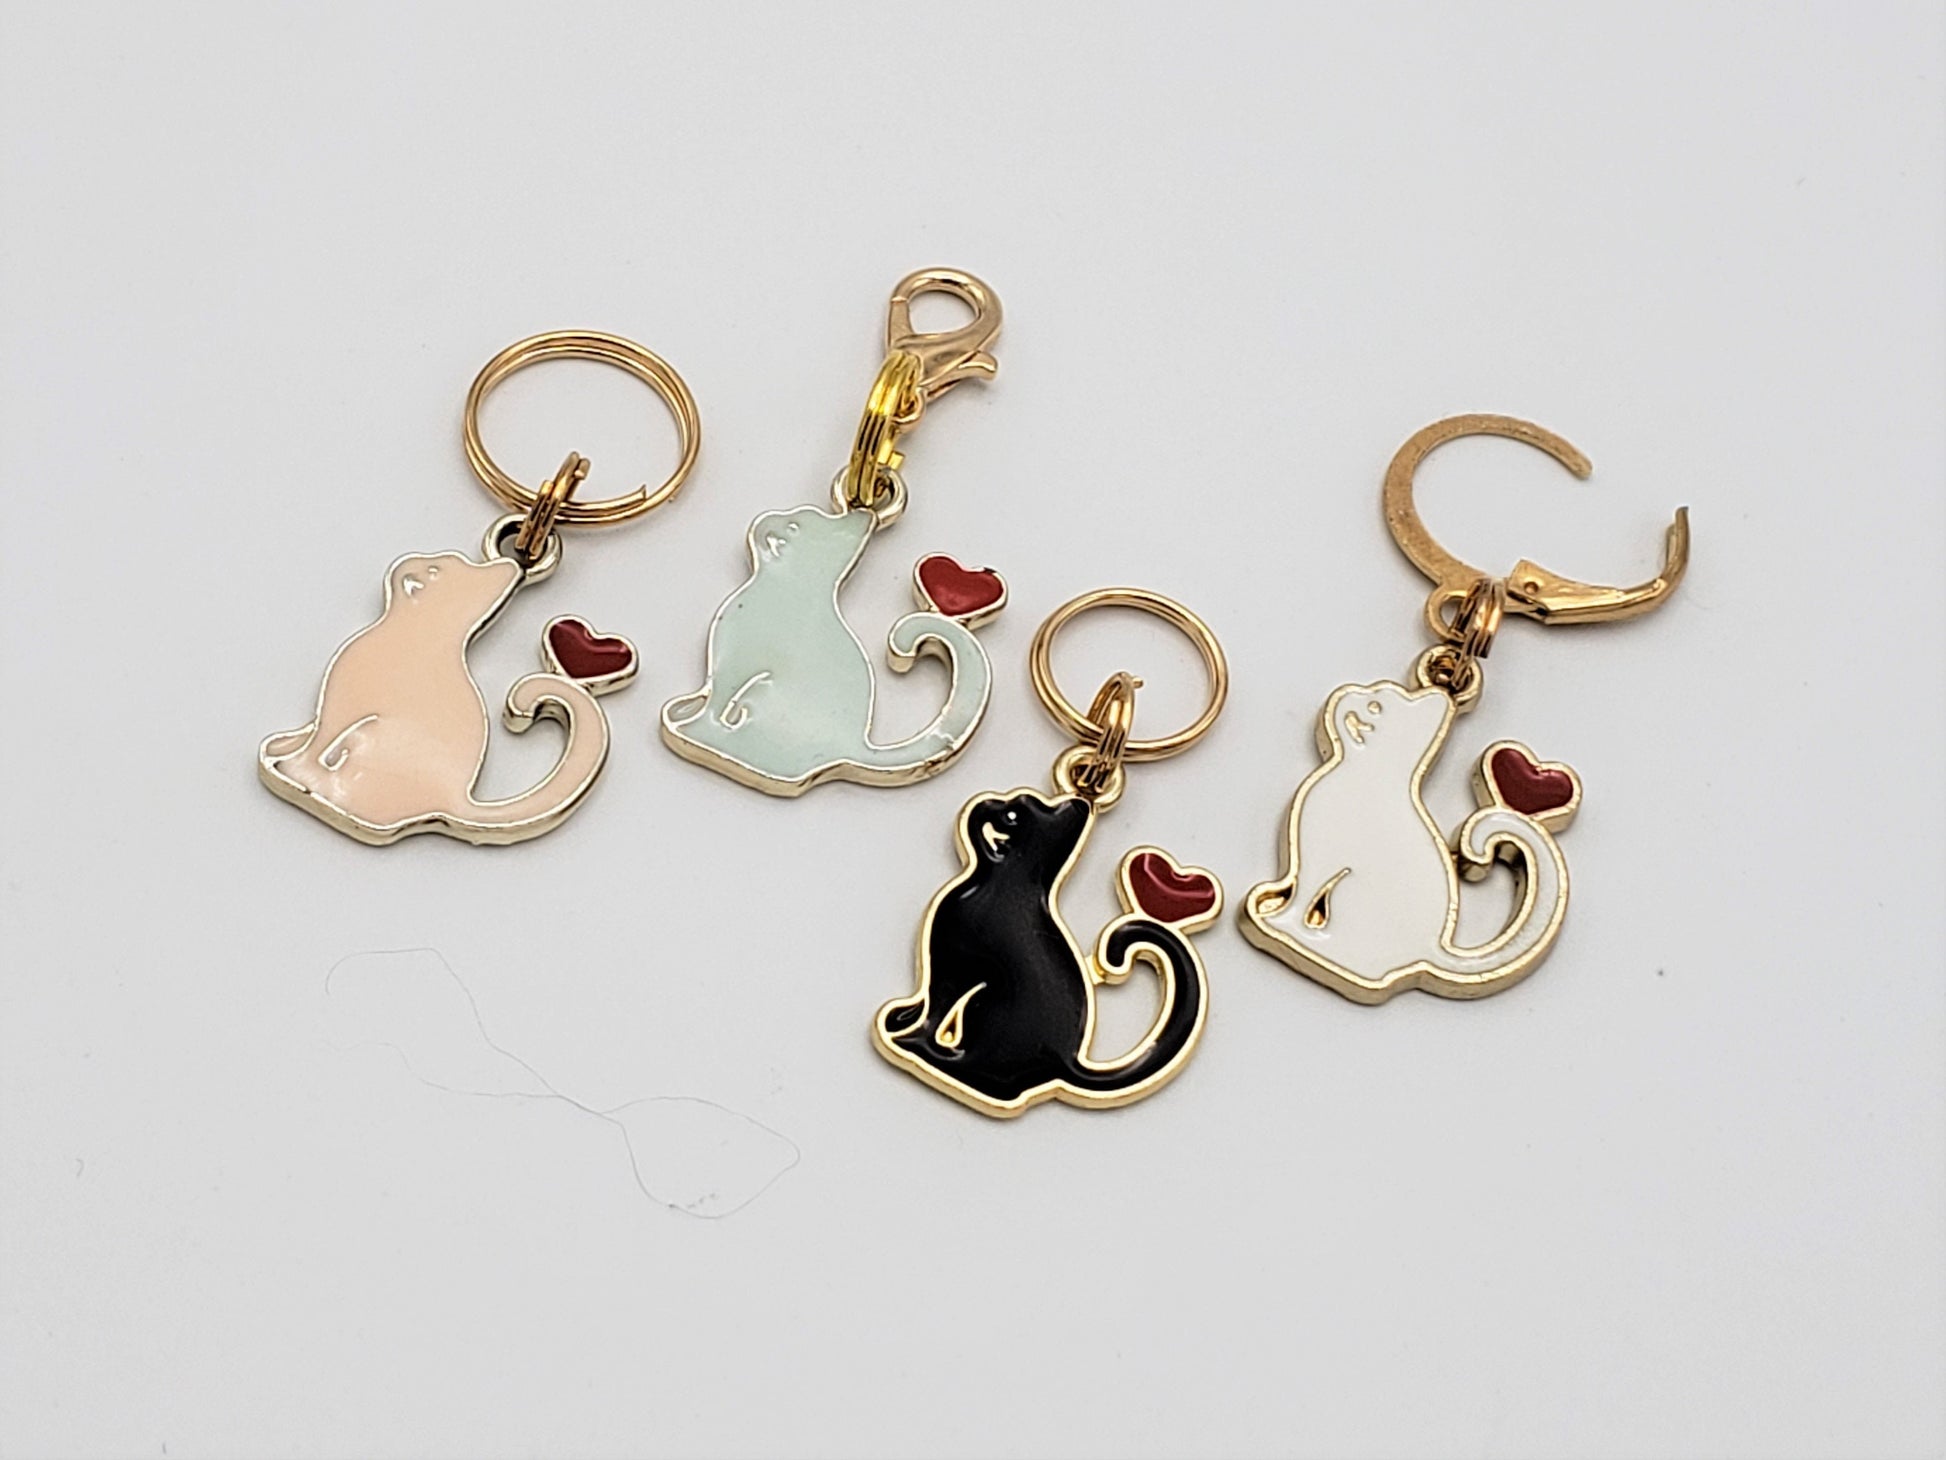 Cat Stitch Markers for Knitting, 4pc Kitty Love | Crochet stitch marker, progress keeper, project bag charms, crochet accessory